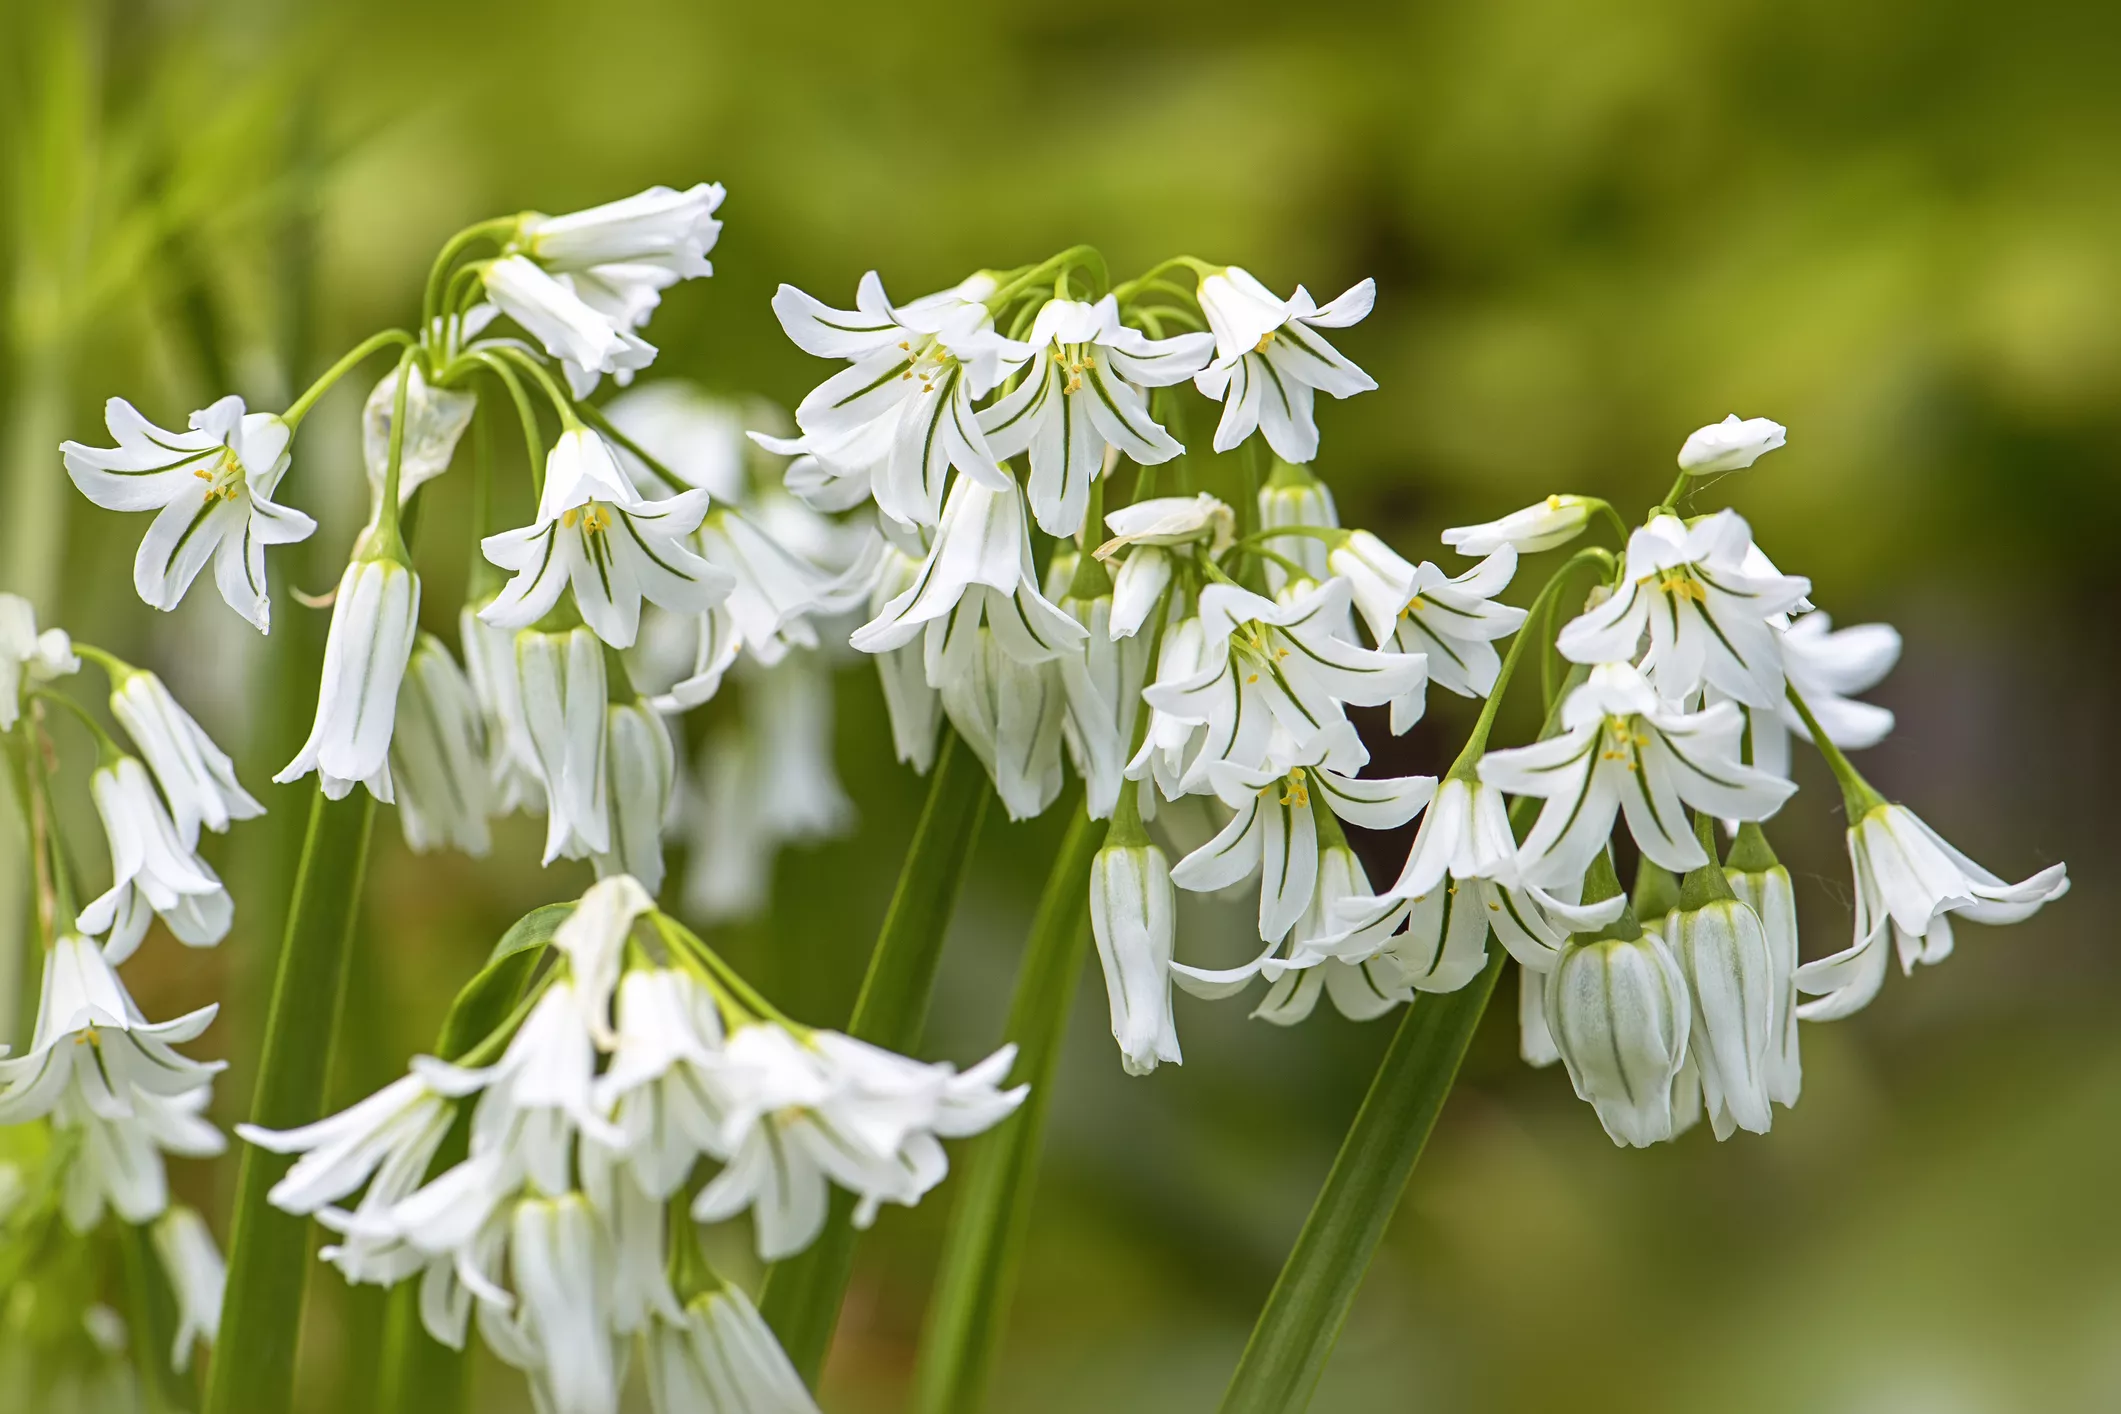 Delicate white flowers hanging from a green wild onion plant